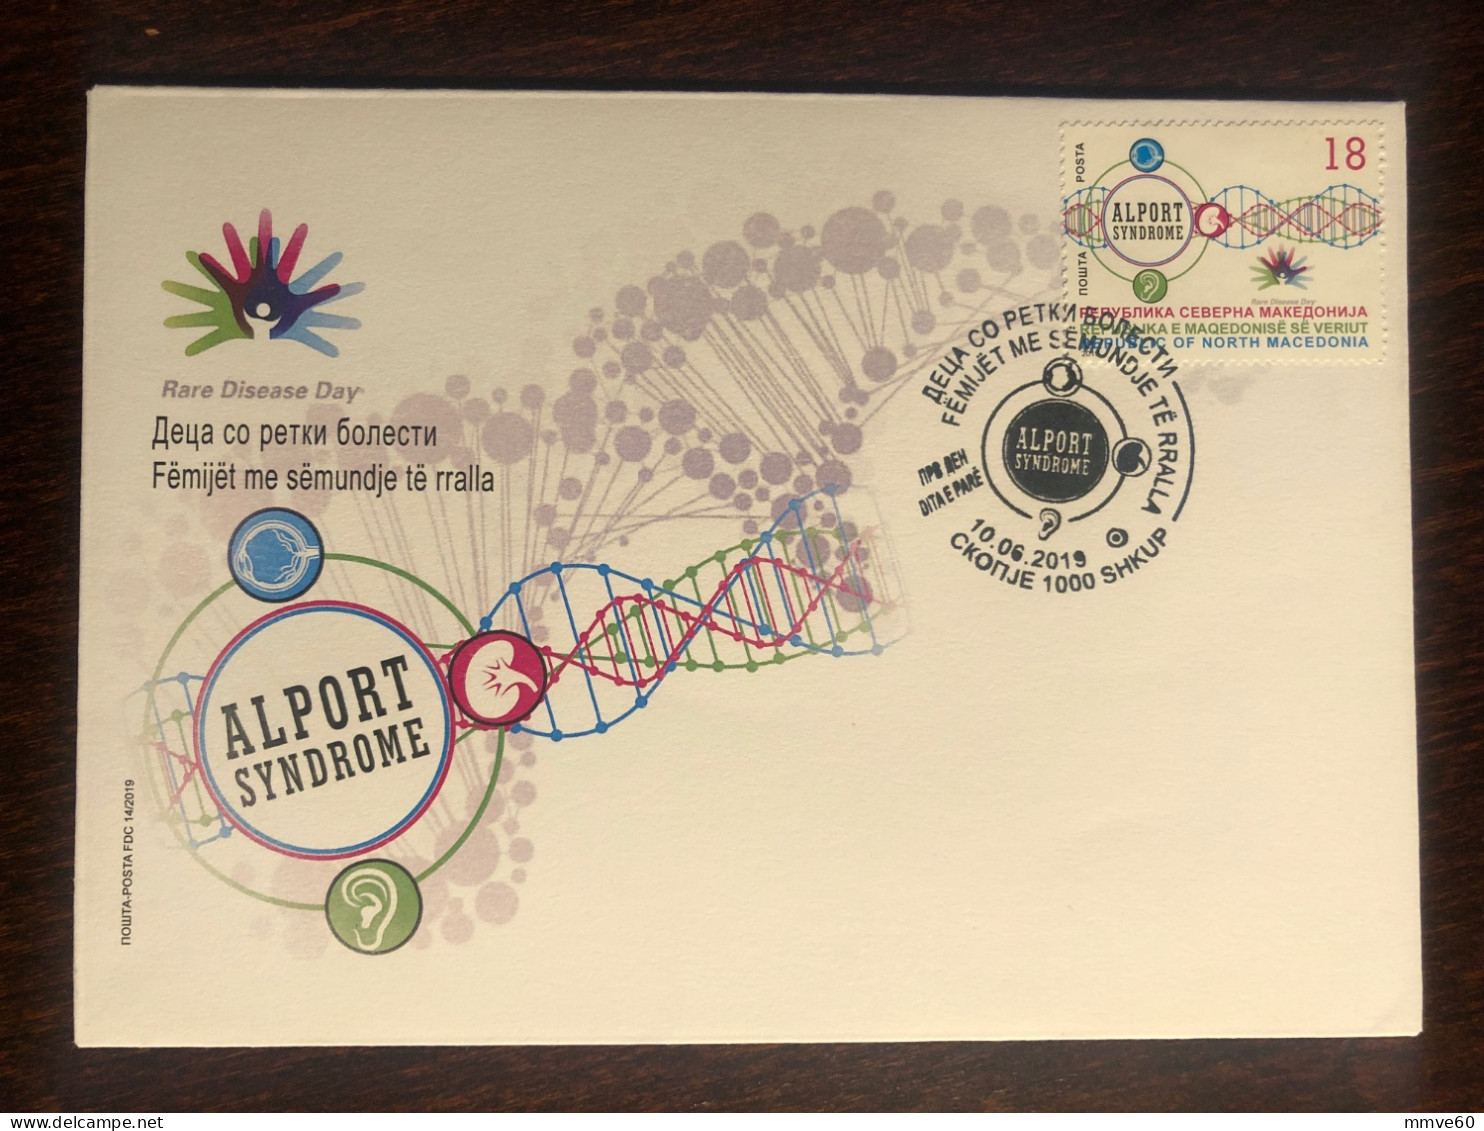 MACEDONIA FDC COVER 2019 YEAR CHILDREN RARE DISEASES - ALPORT SYNDROME HEALTH MEDICINE STAMPS - North Macedonia